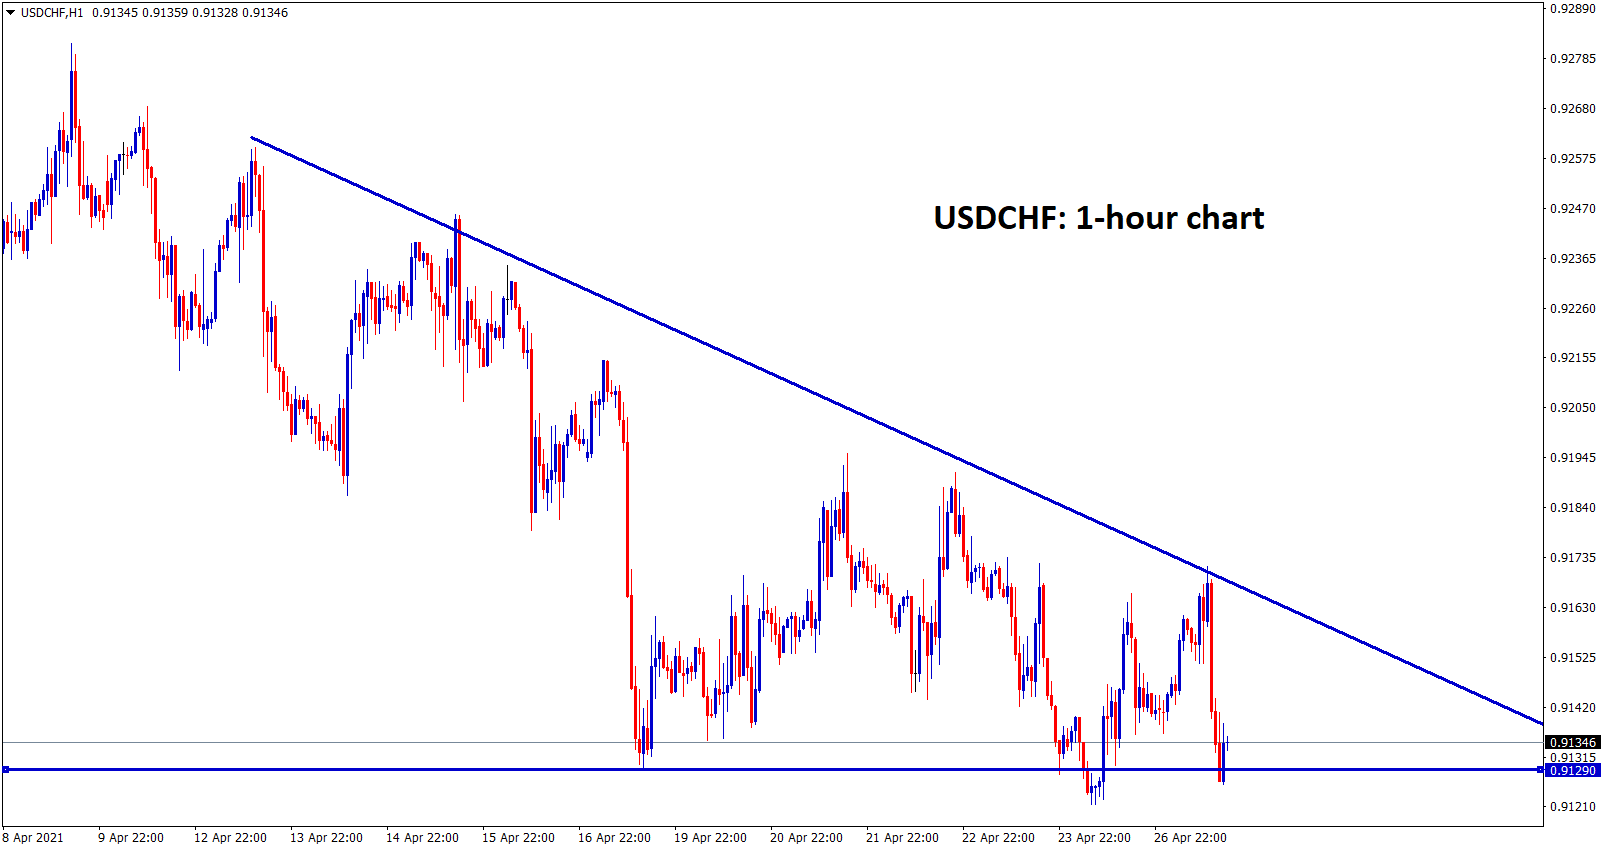 USDCHF formed a descending triangle pattern